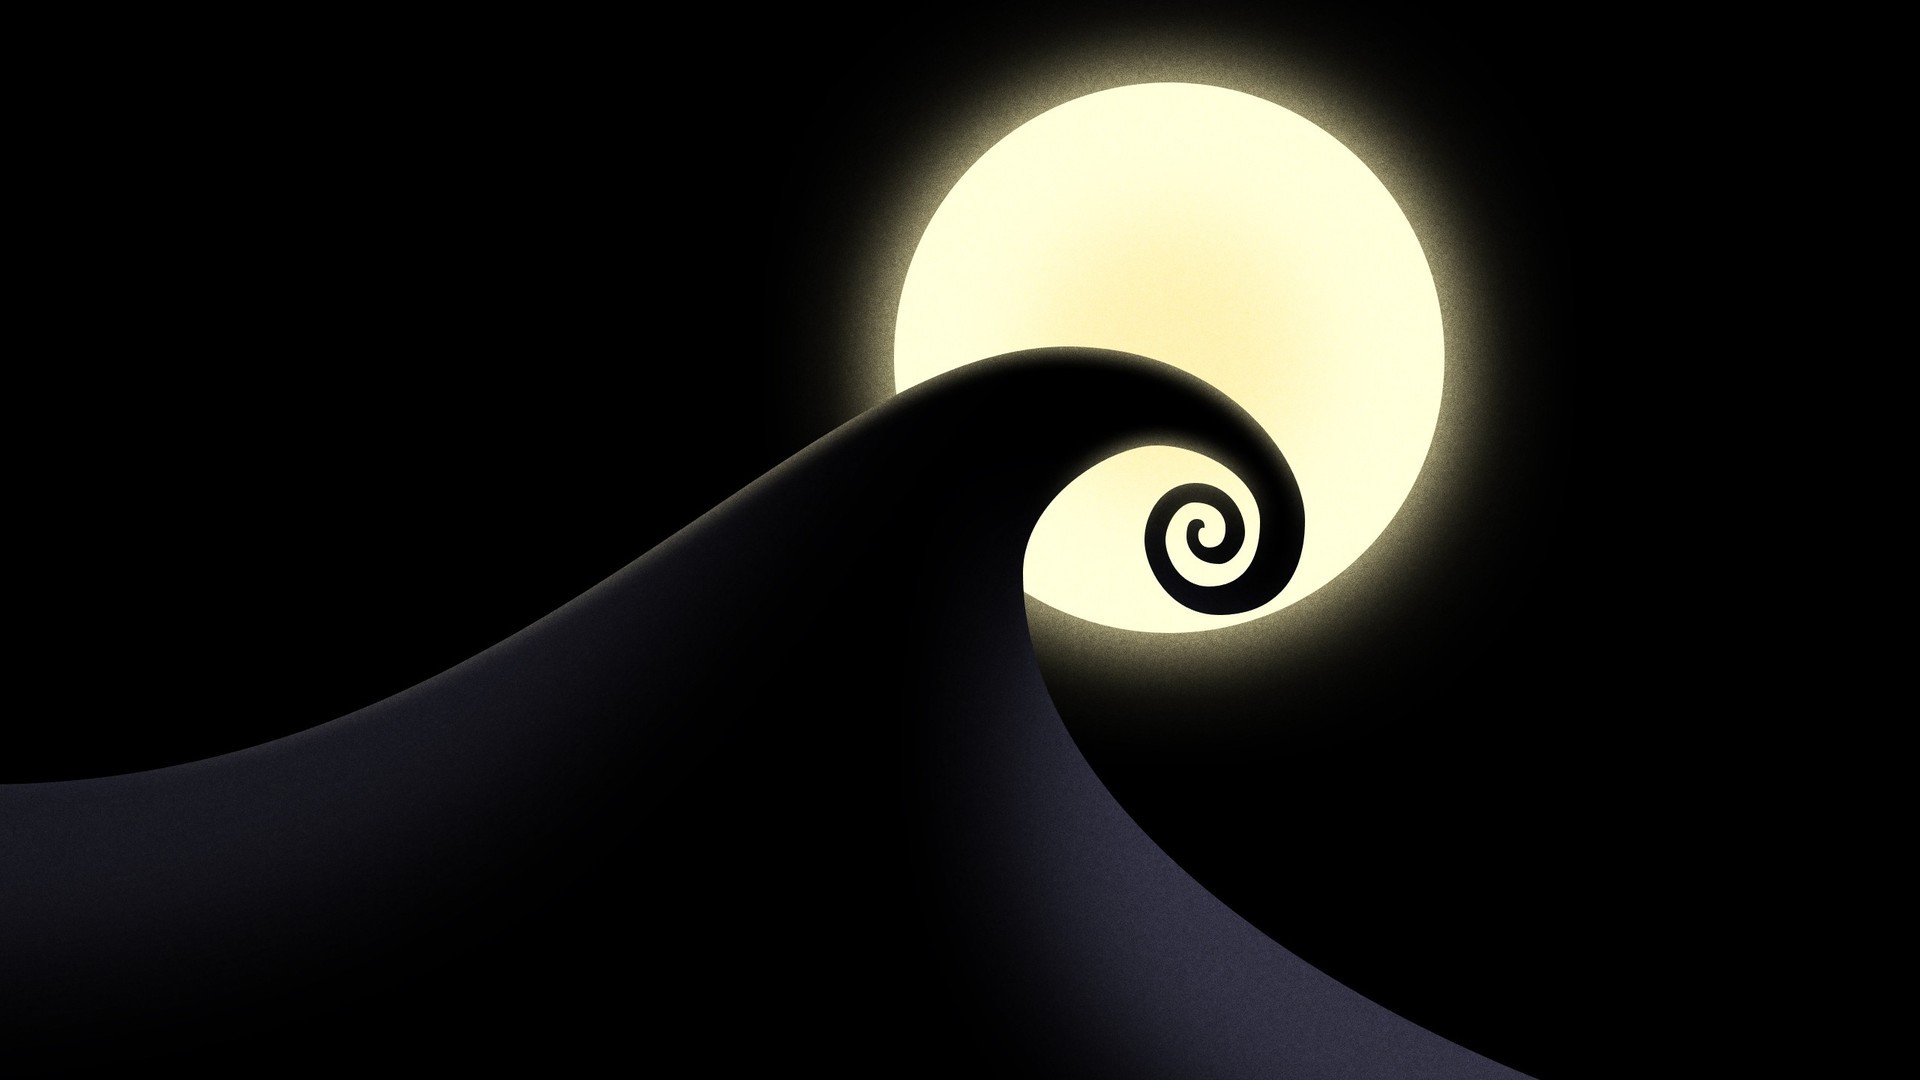 1920x1080 of Nightmare Before Christmas Cell Phone Wallpaper. All wallpapers .